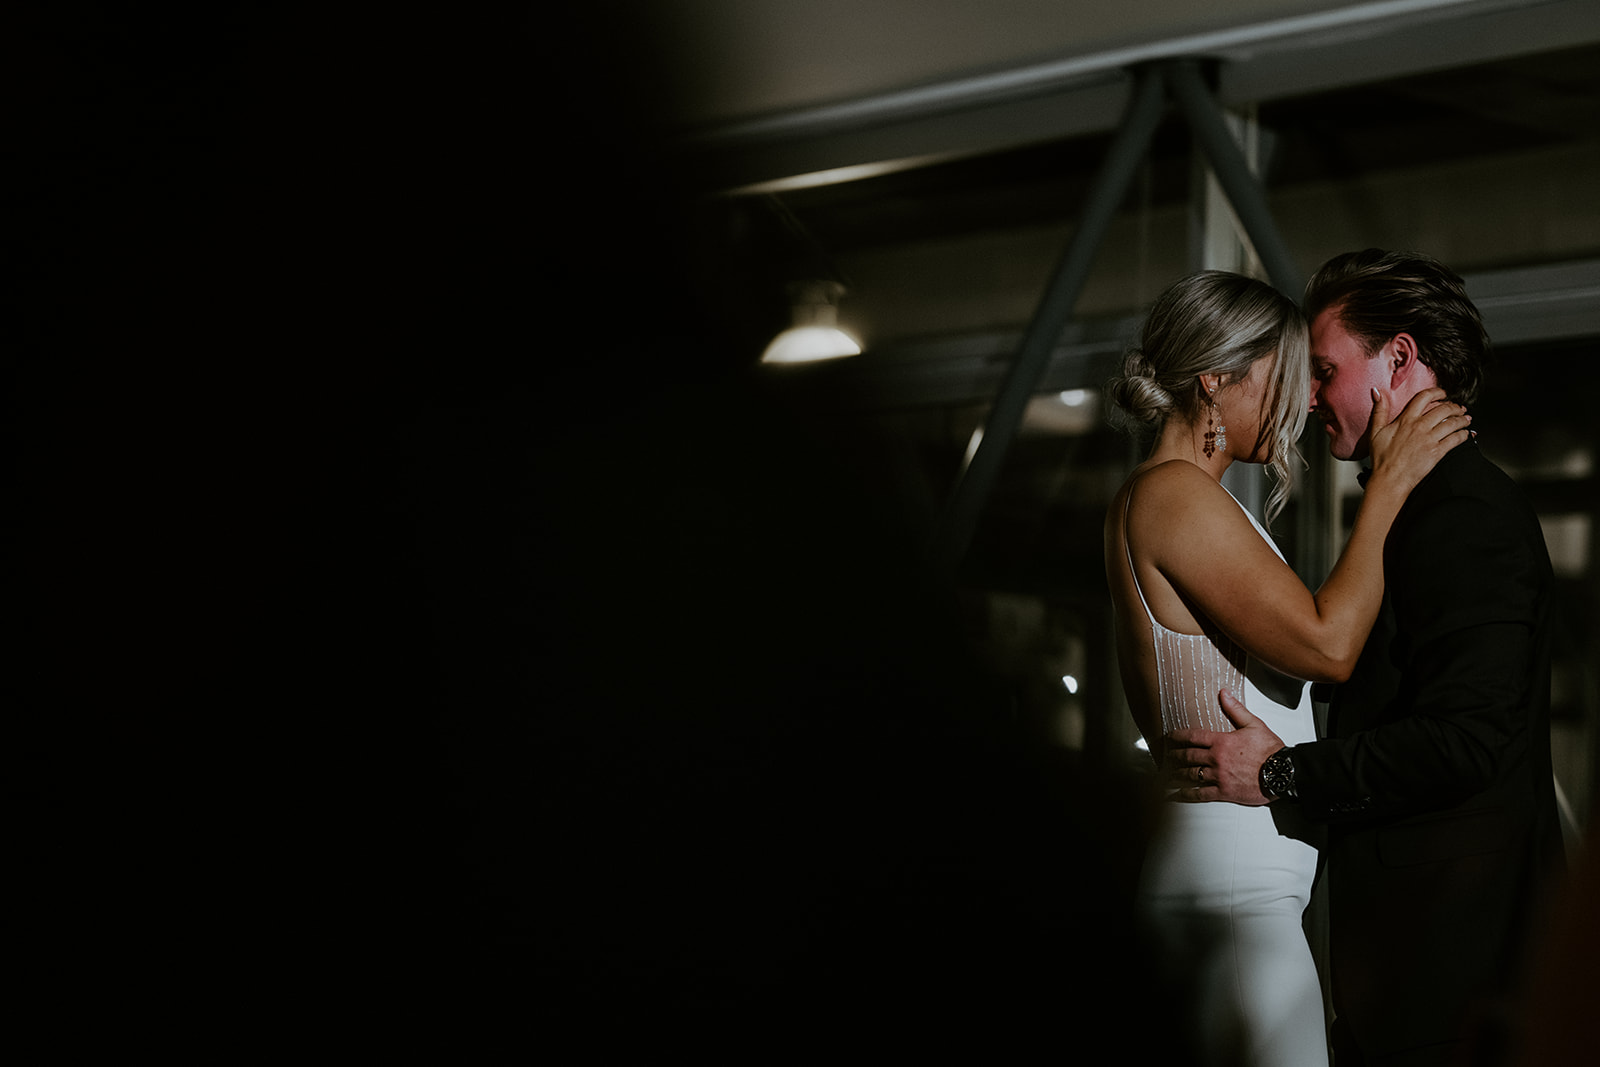 First Dance Vancouver Wedding Photographer